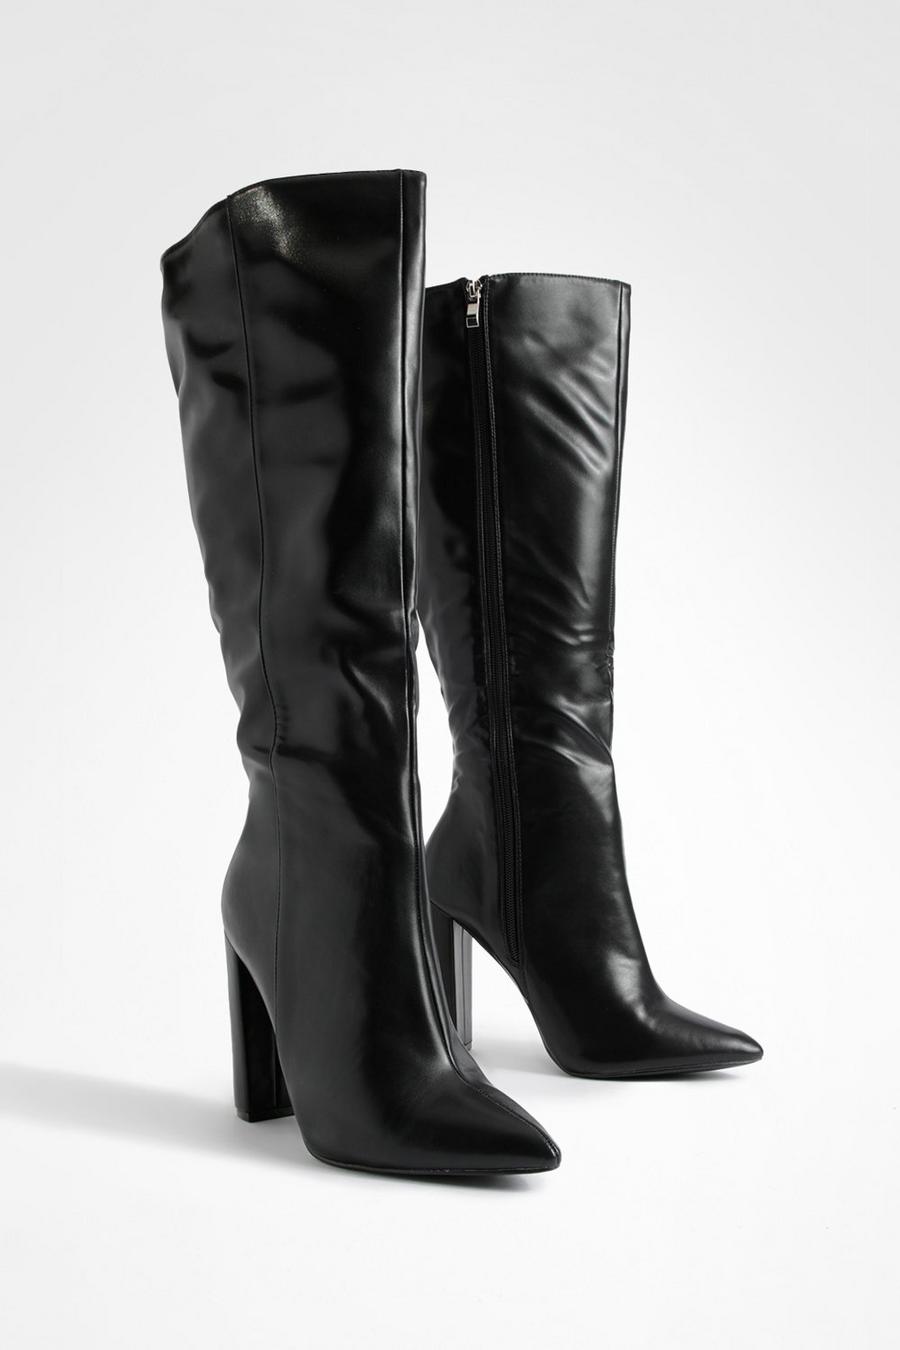 Black Wide Width Pointed Toe Knee High Boots